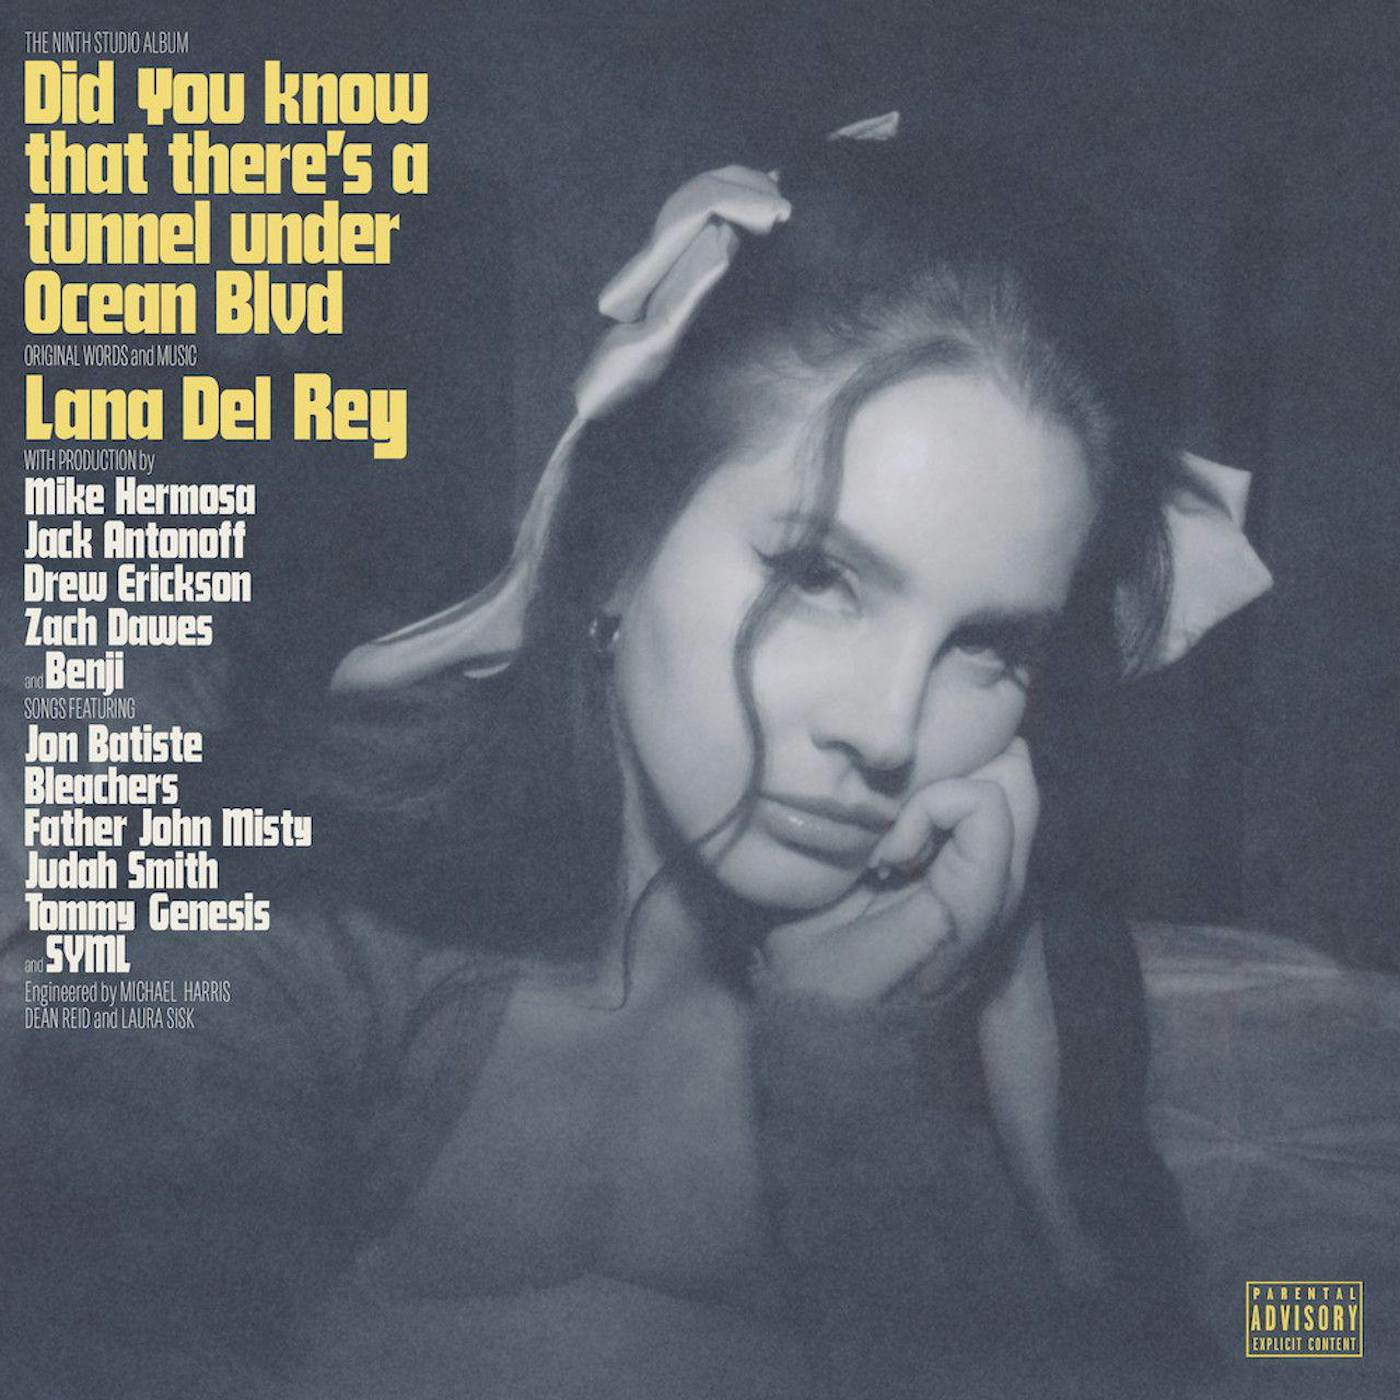 Lana Del Rey Did You Know That There's Tunnel Under Ocean Blvd (2LP) Vinyl Record